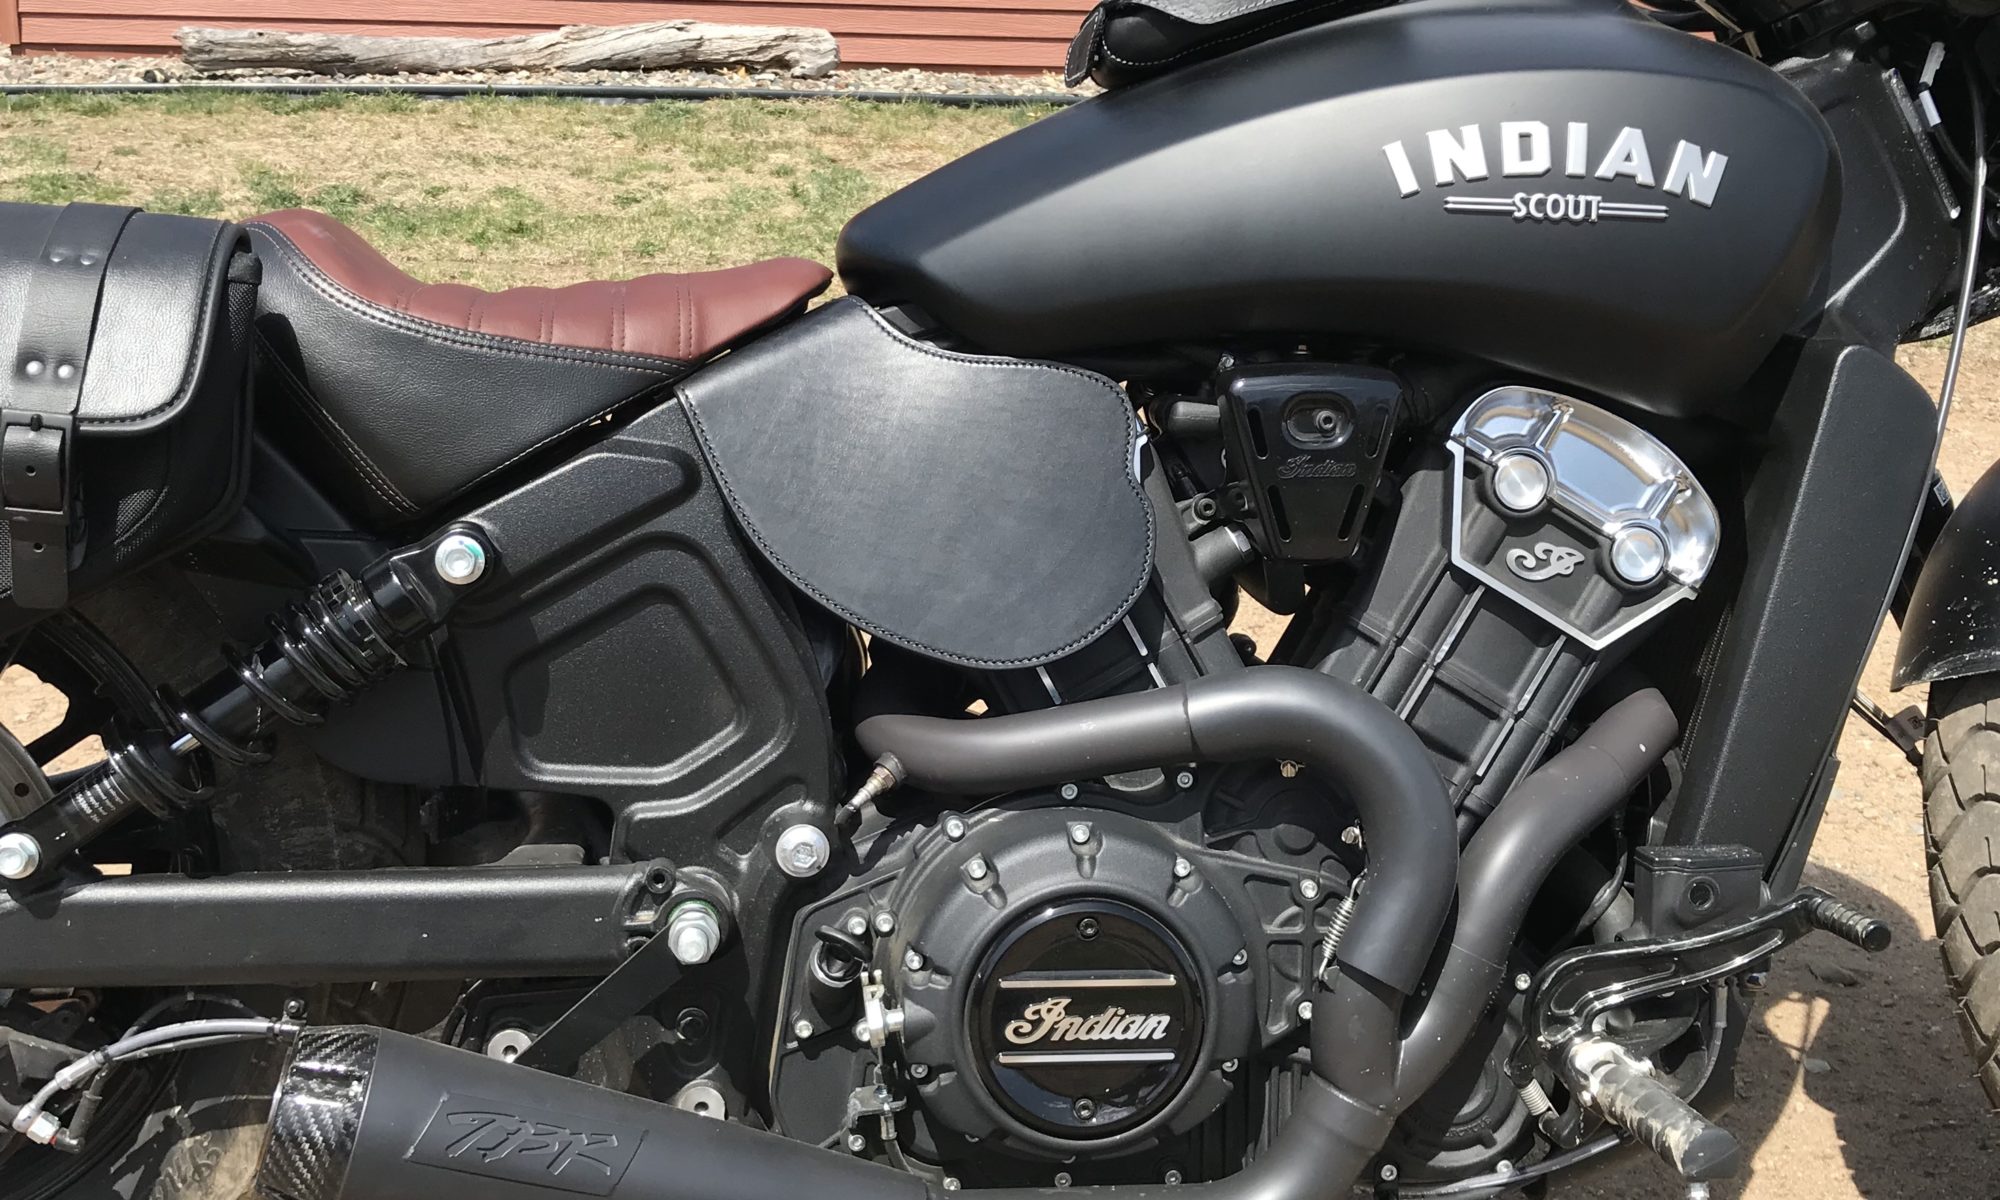 Indian Scout with black heat shield plain